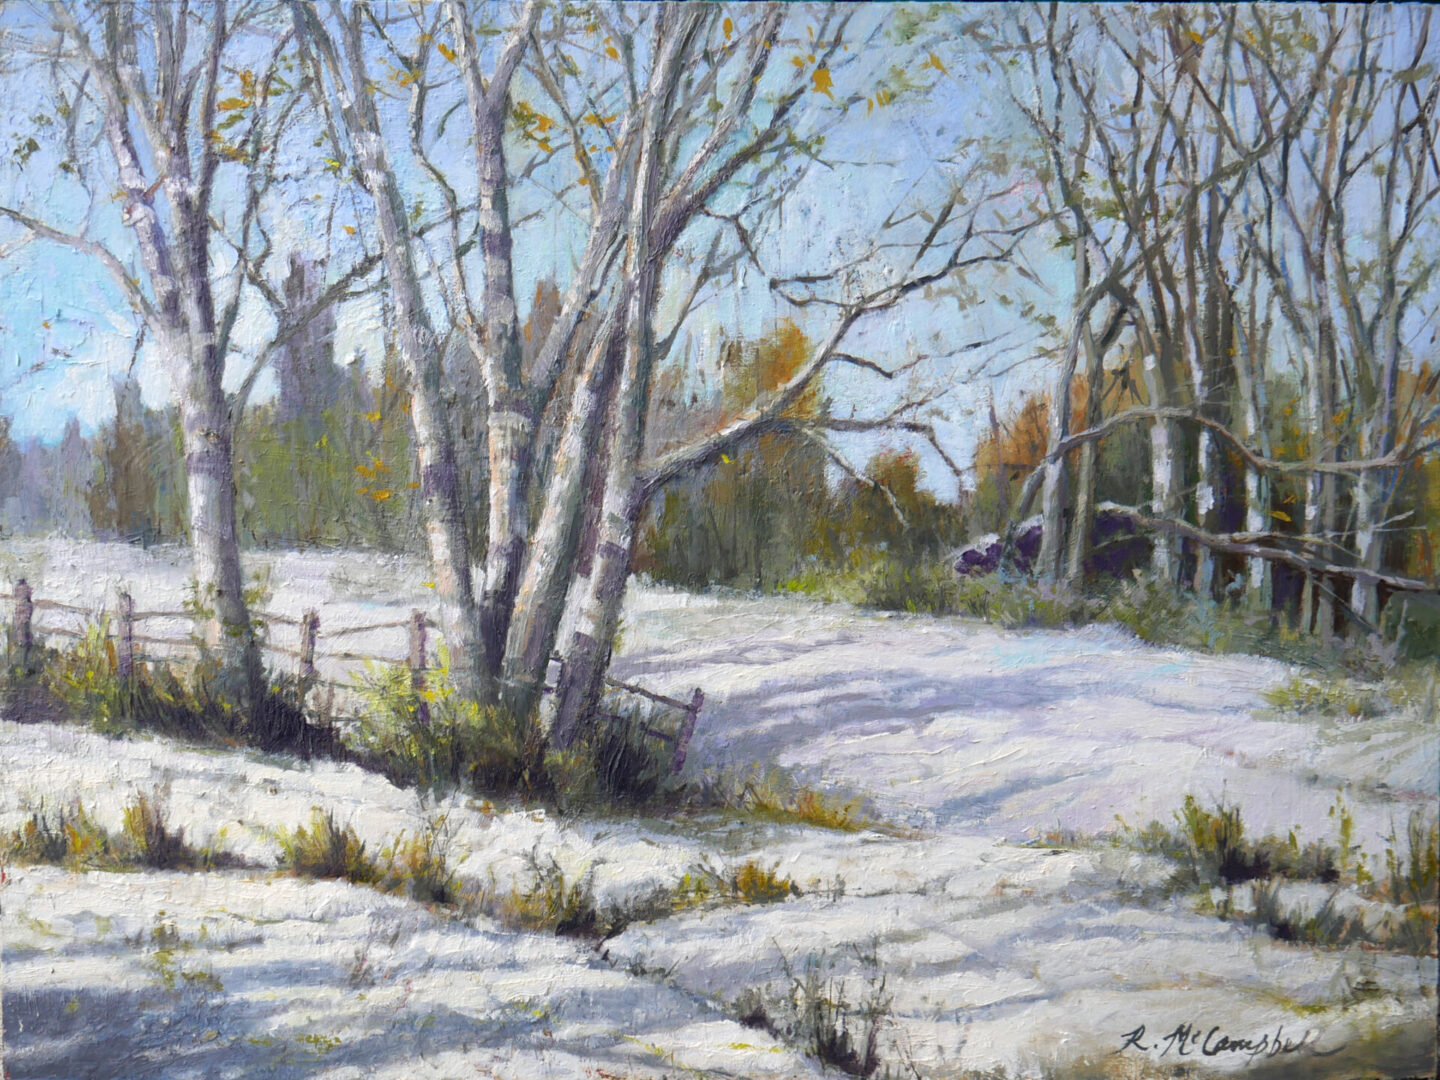 Winter Shadows, oil on panel, 18" h x 24" w by Rachael McCampbell © 2023